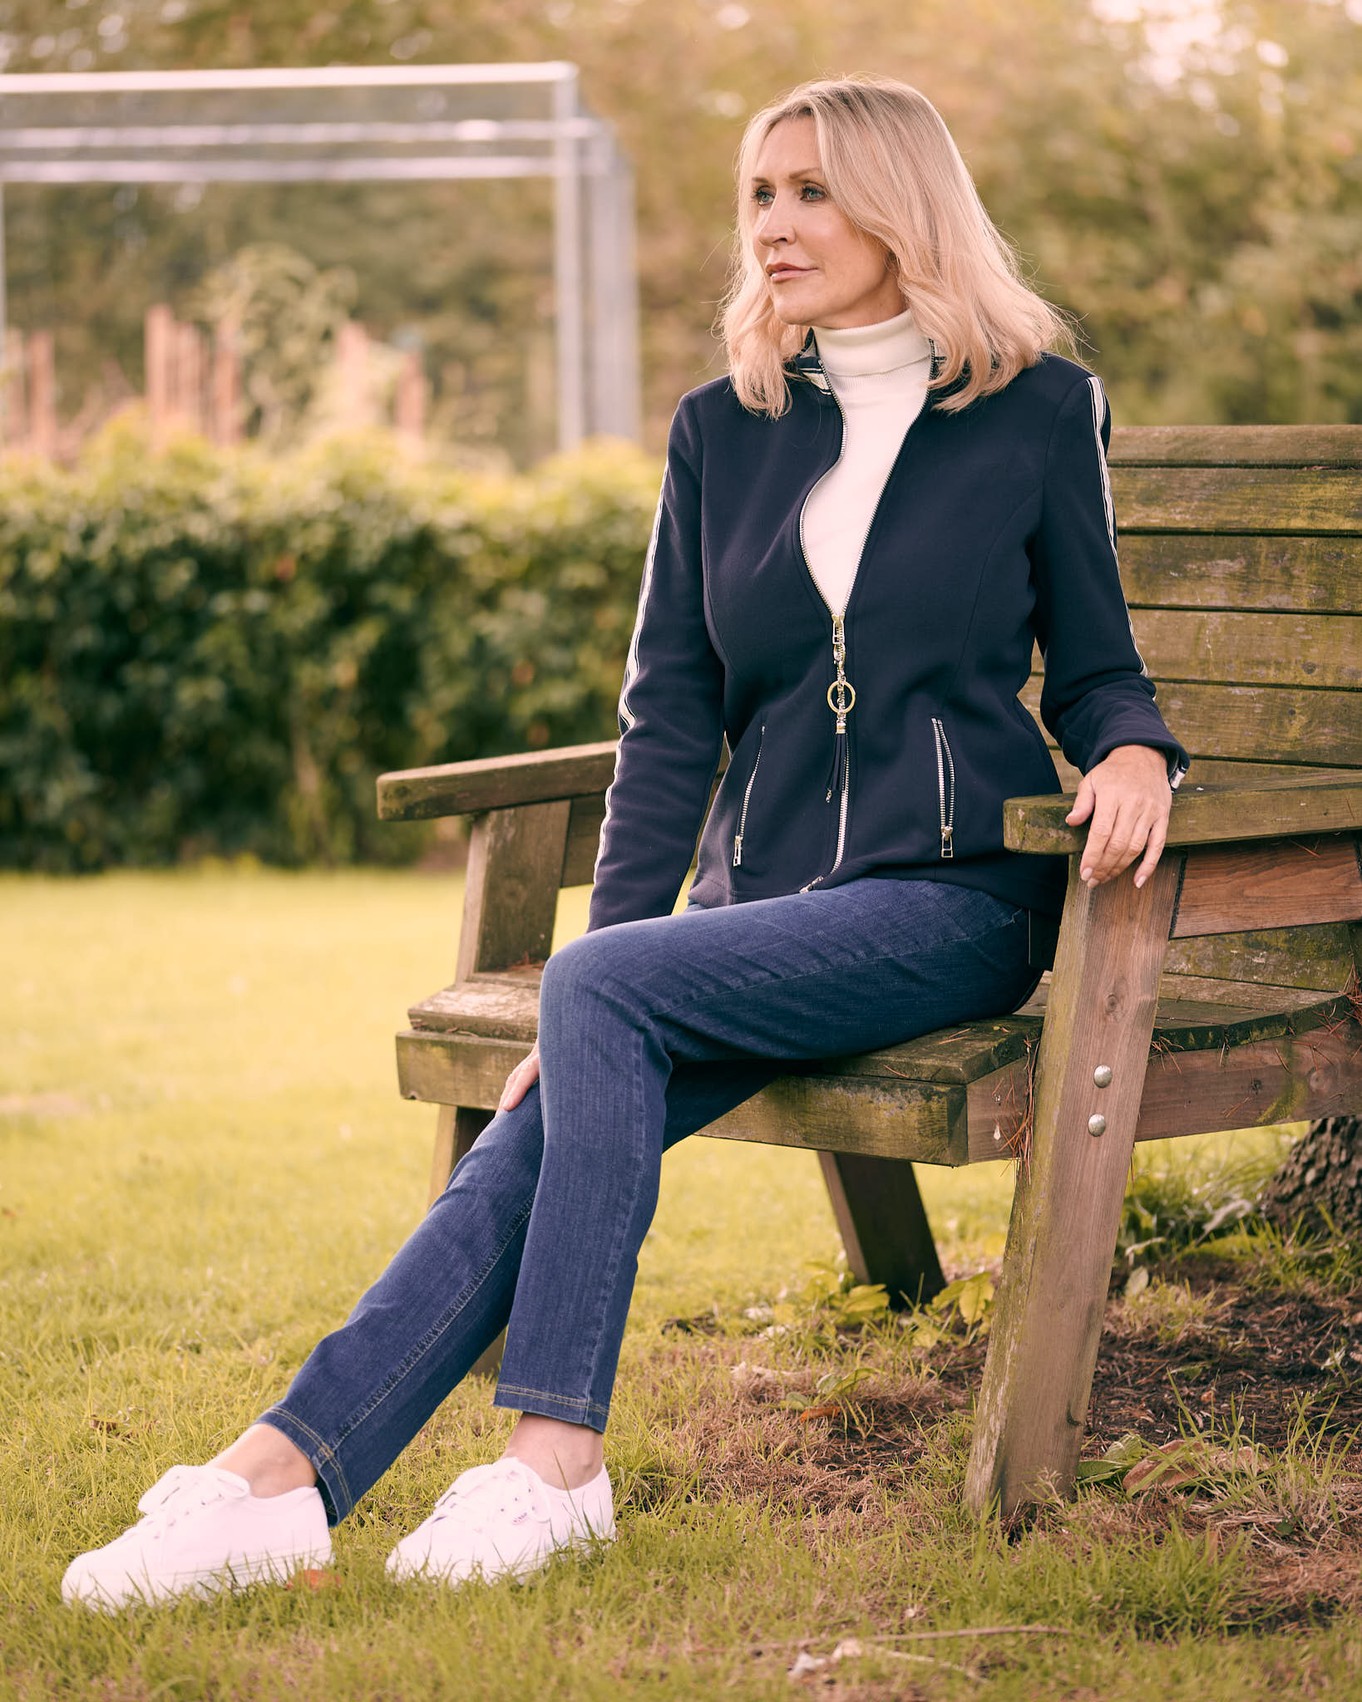 Ladies classy casual outfit with stretch jeans and a casual sporty jacket